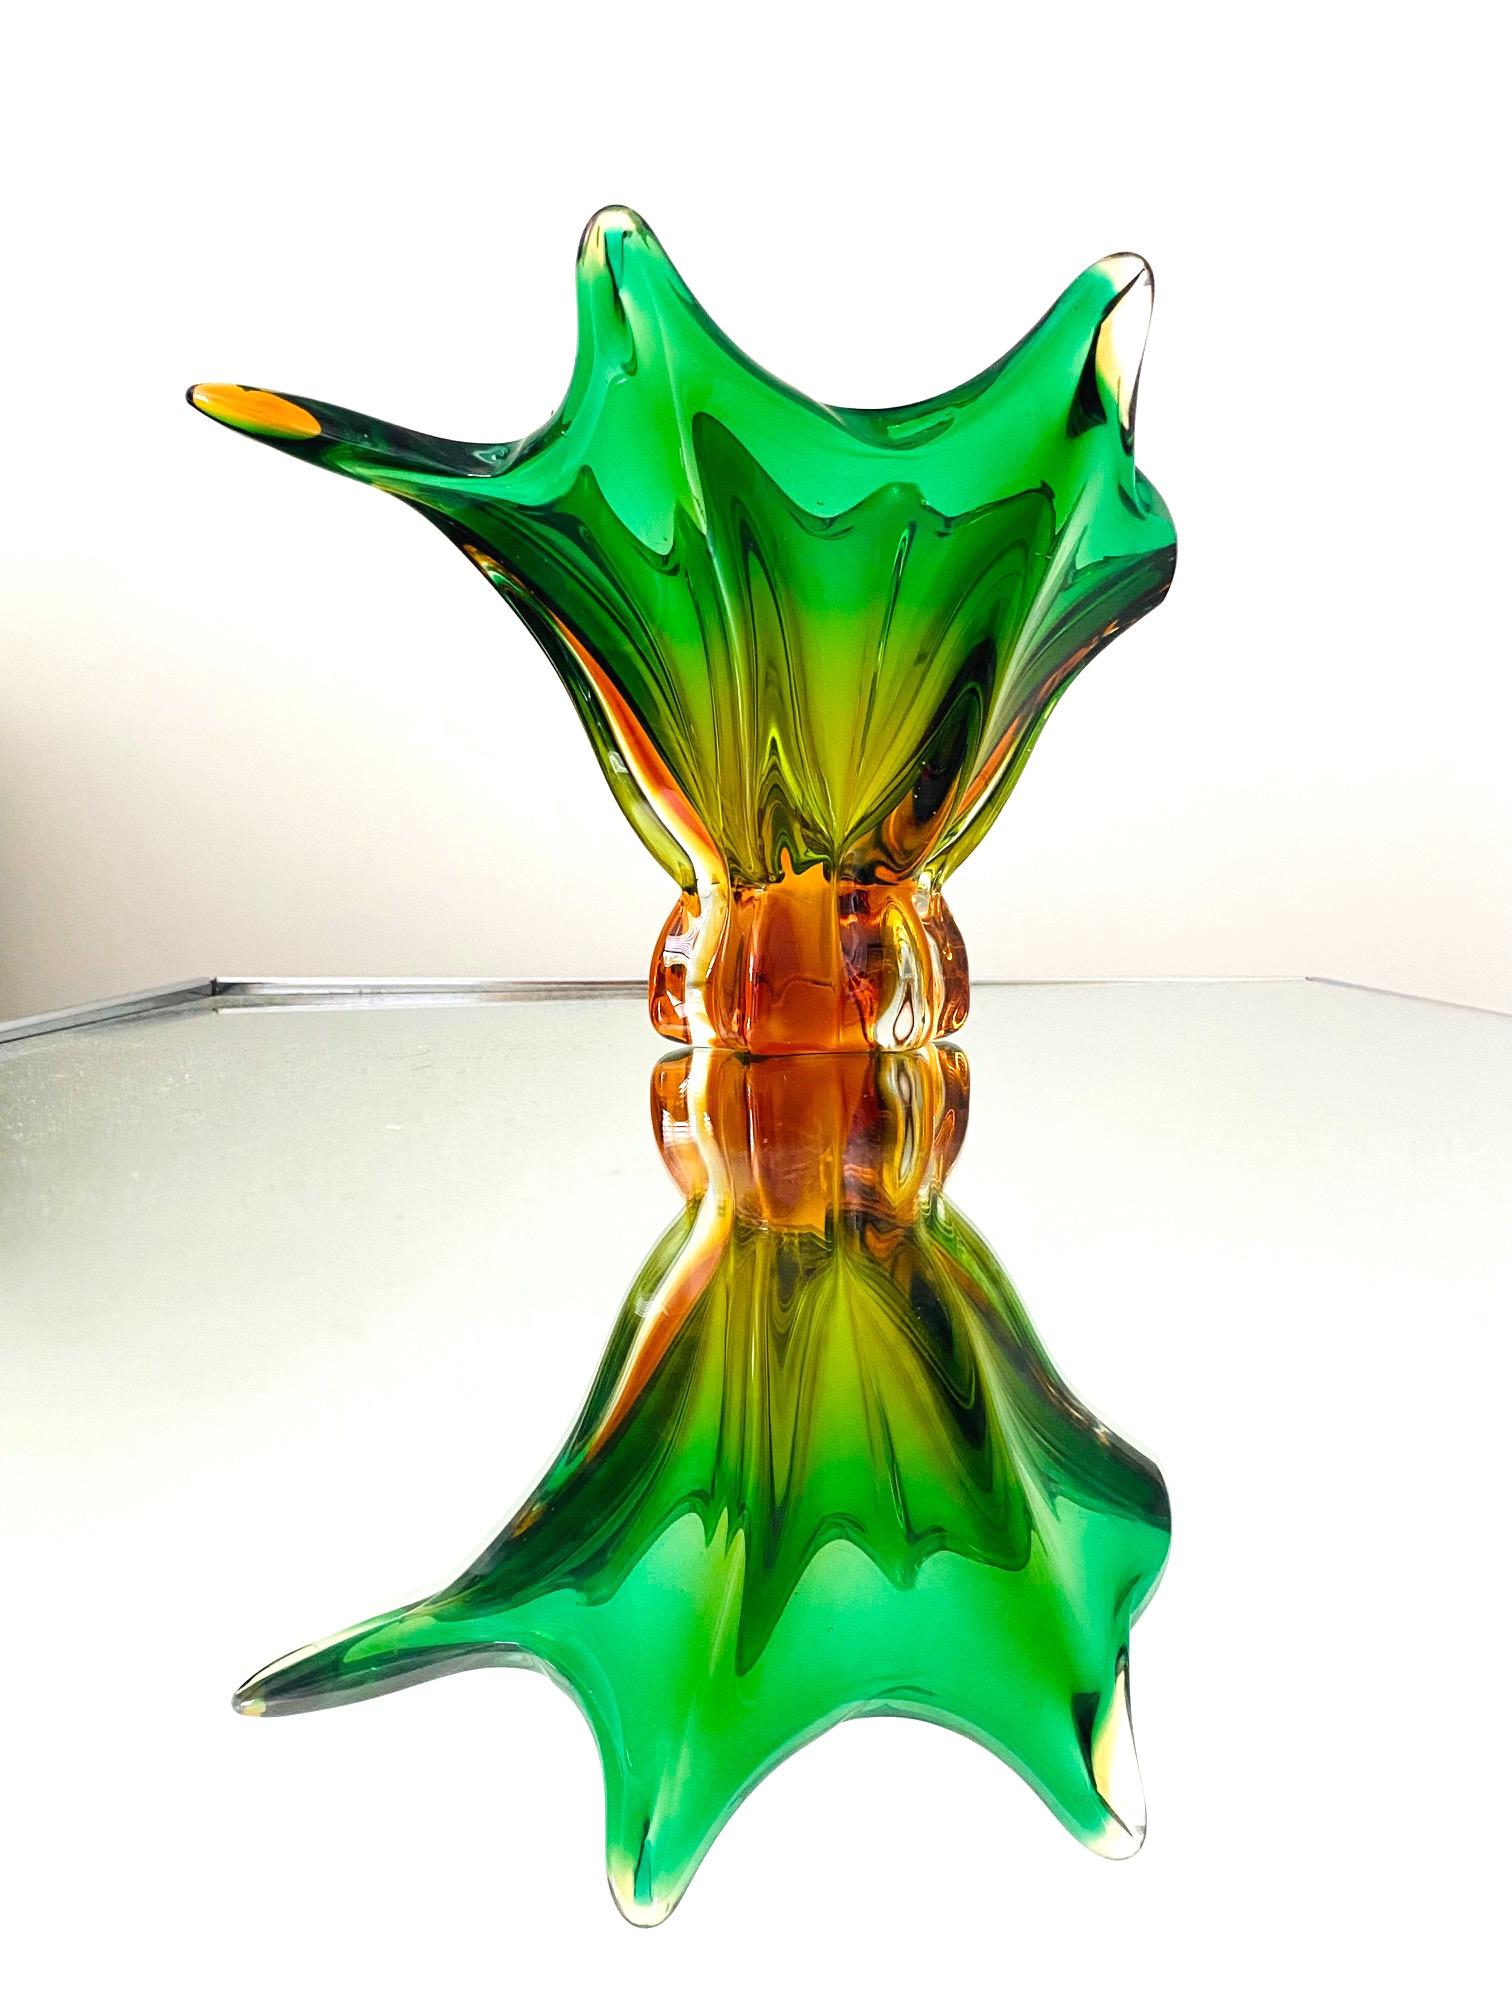 Italian Mid-Century Modern footed bowl or vase in handblown Murano glass. The vase has an abstract floral form reminiscent of a lily. Comprised of clear glass with Sommerso technique with submerged colors orange amber and vibrant emerald green.